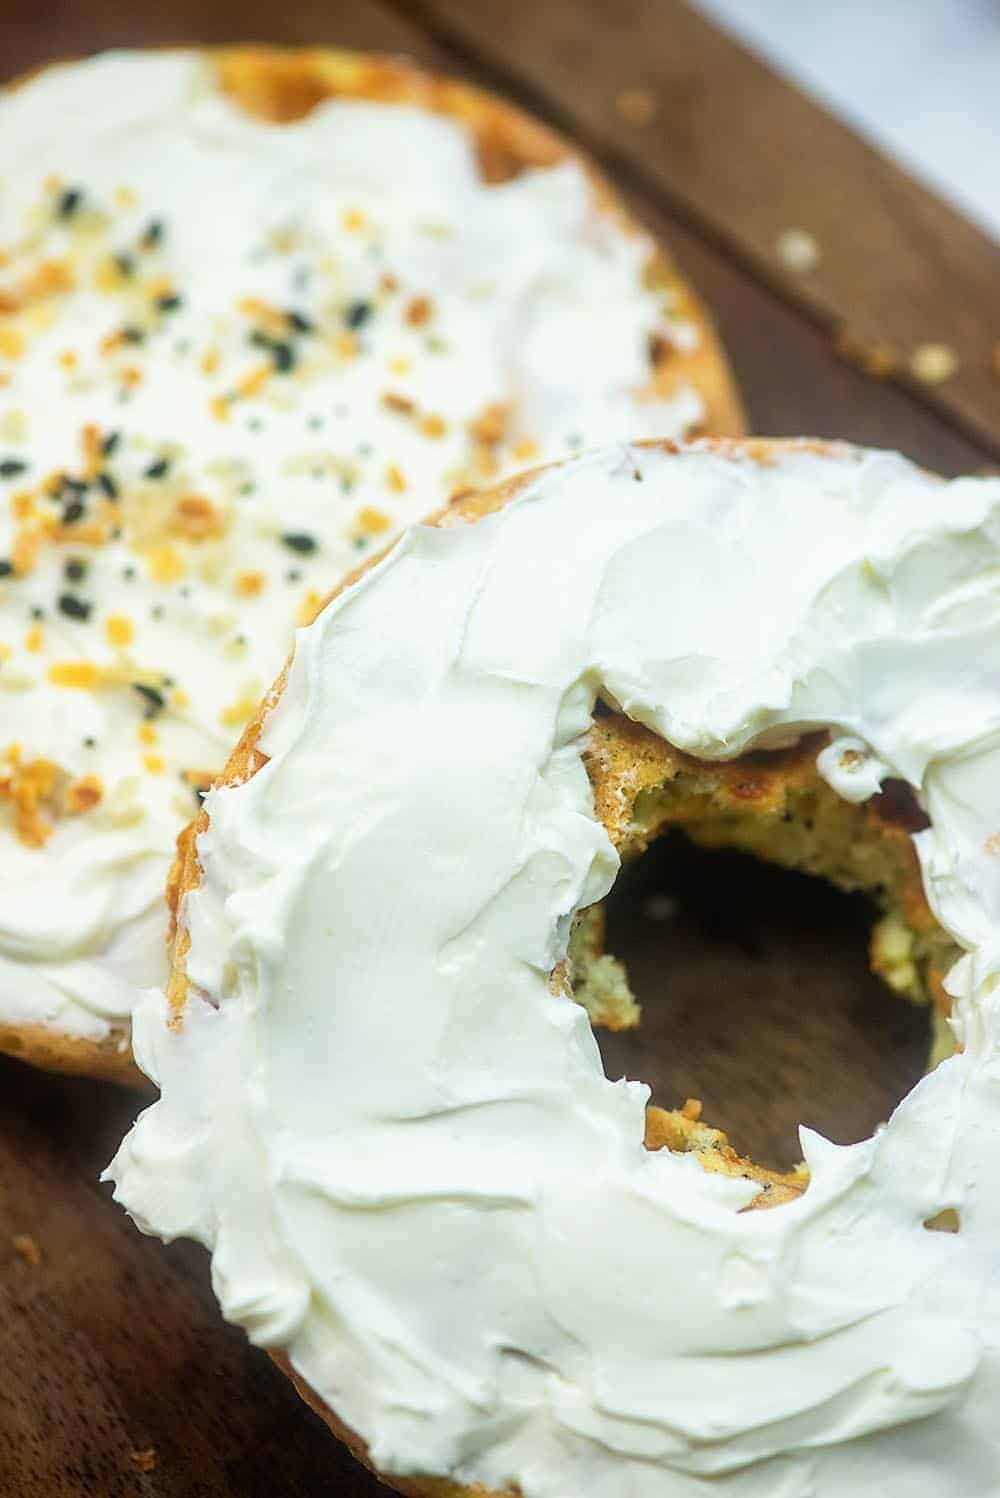 A low carb bagel topped with cream cheese and seasoning with a whole cut out of the middle.